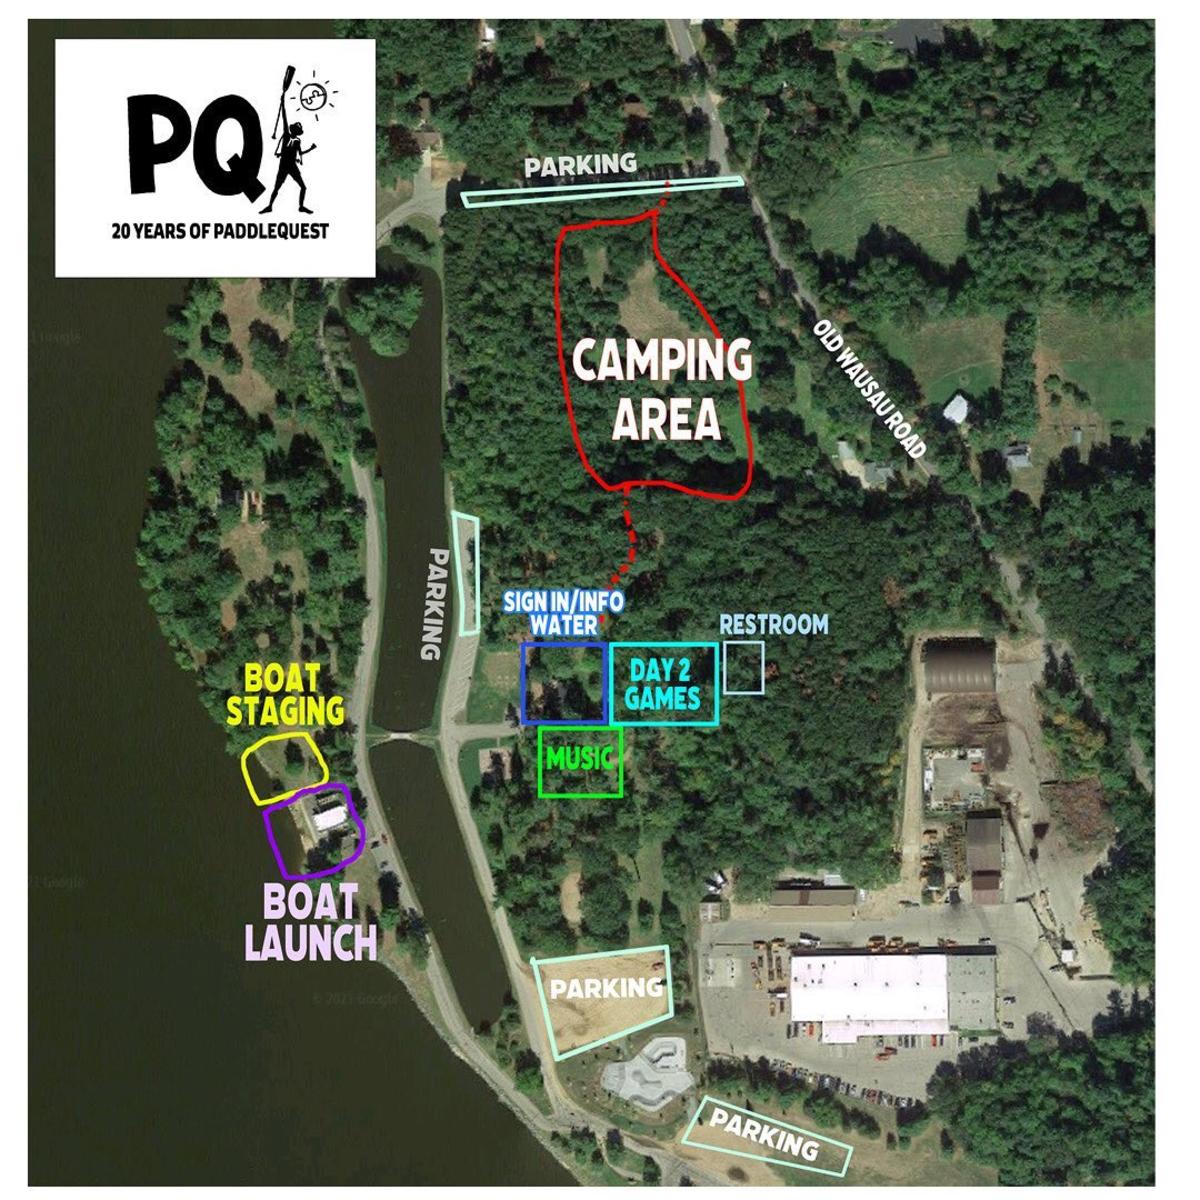 Paddlequest 2021 Event Grounds Map in the Stevens Point Area